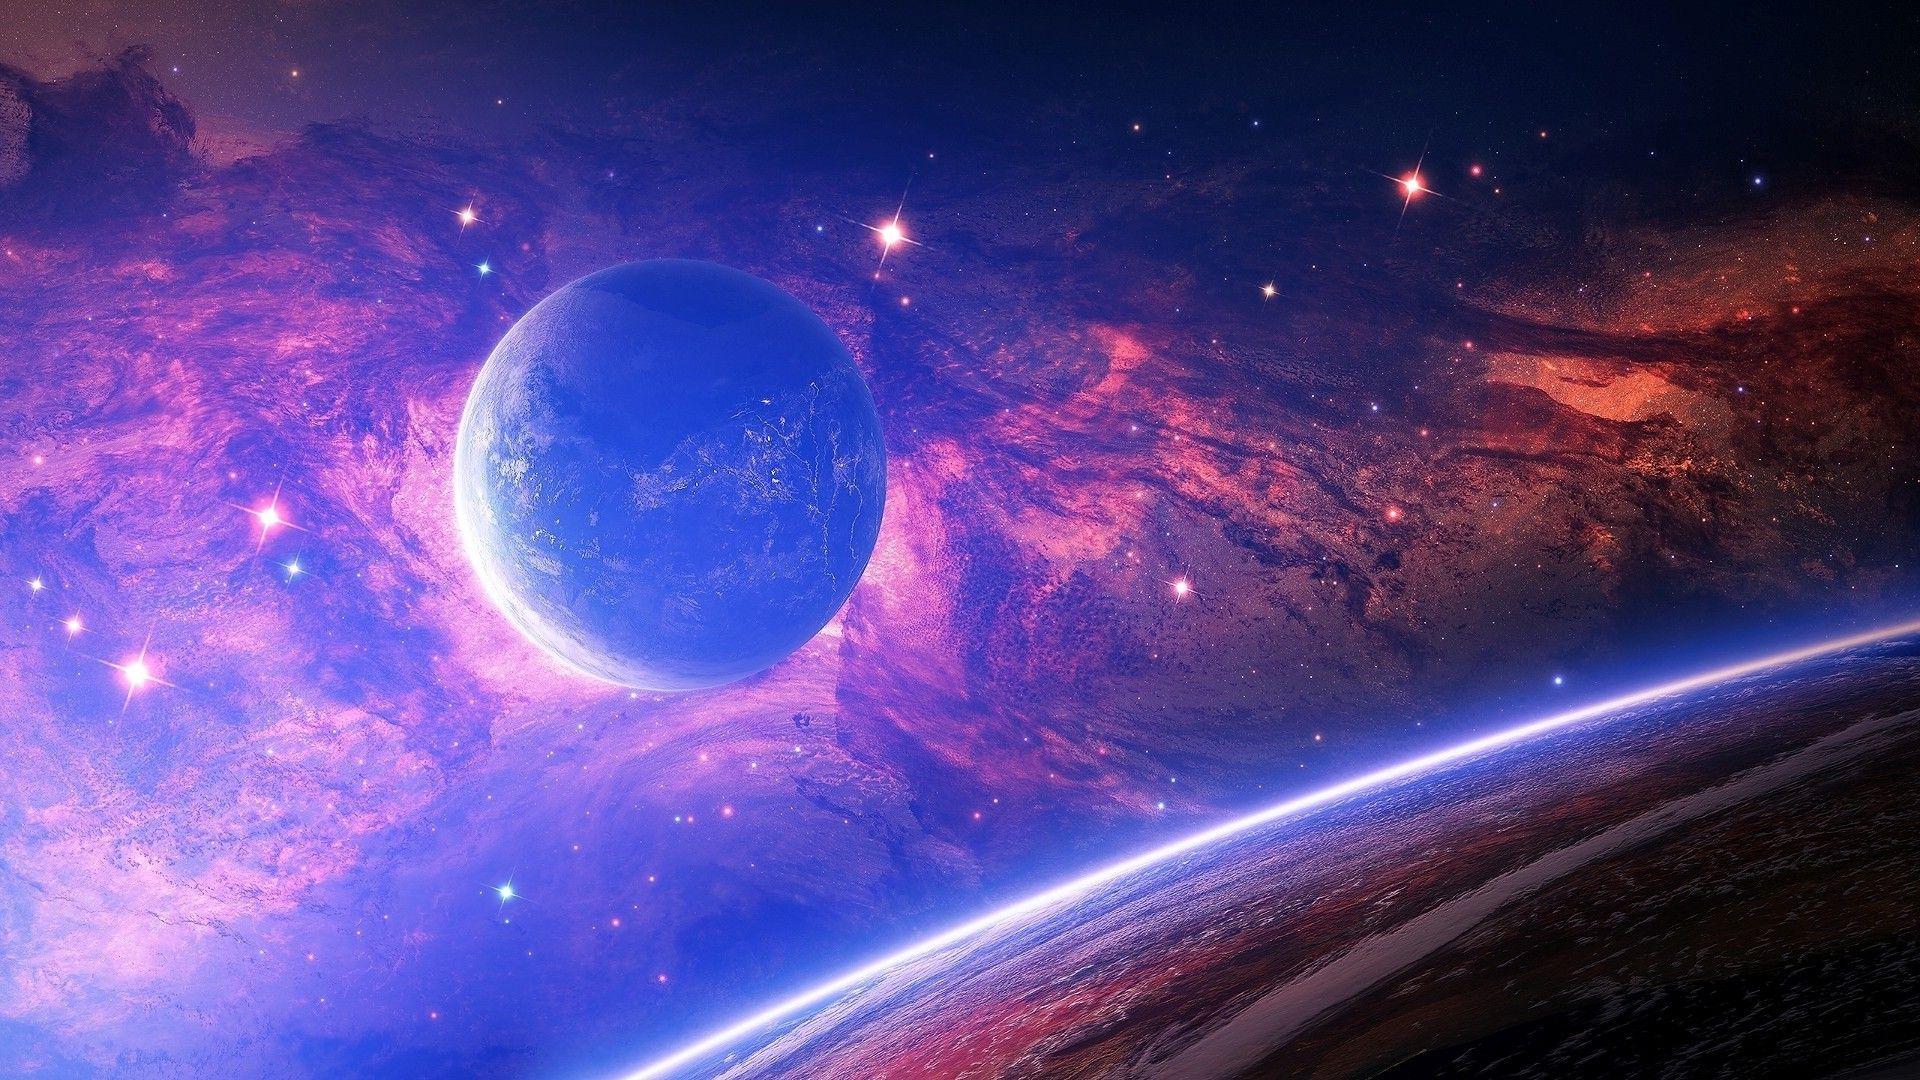 Space PC Wallpapers - Top Free Space PC Backgrounds ...